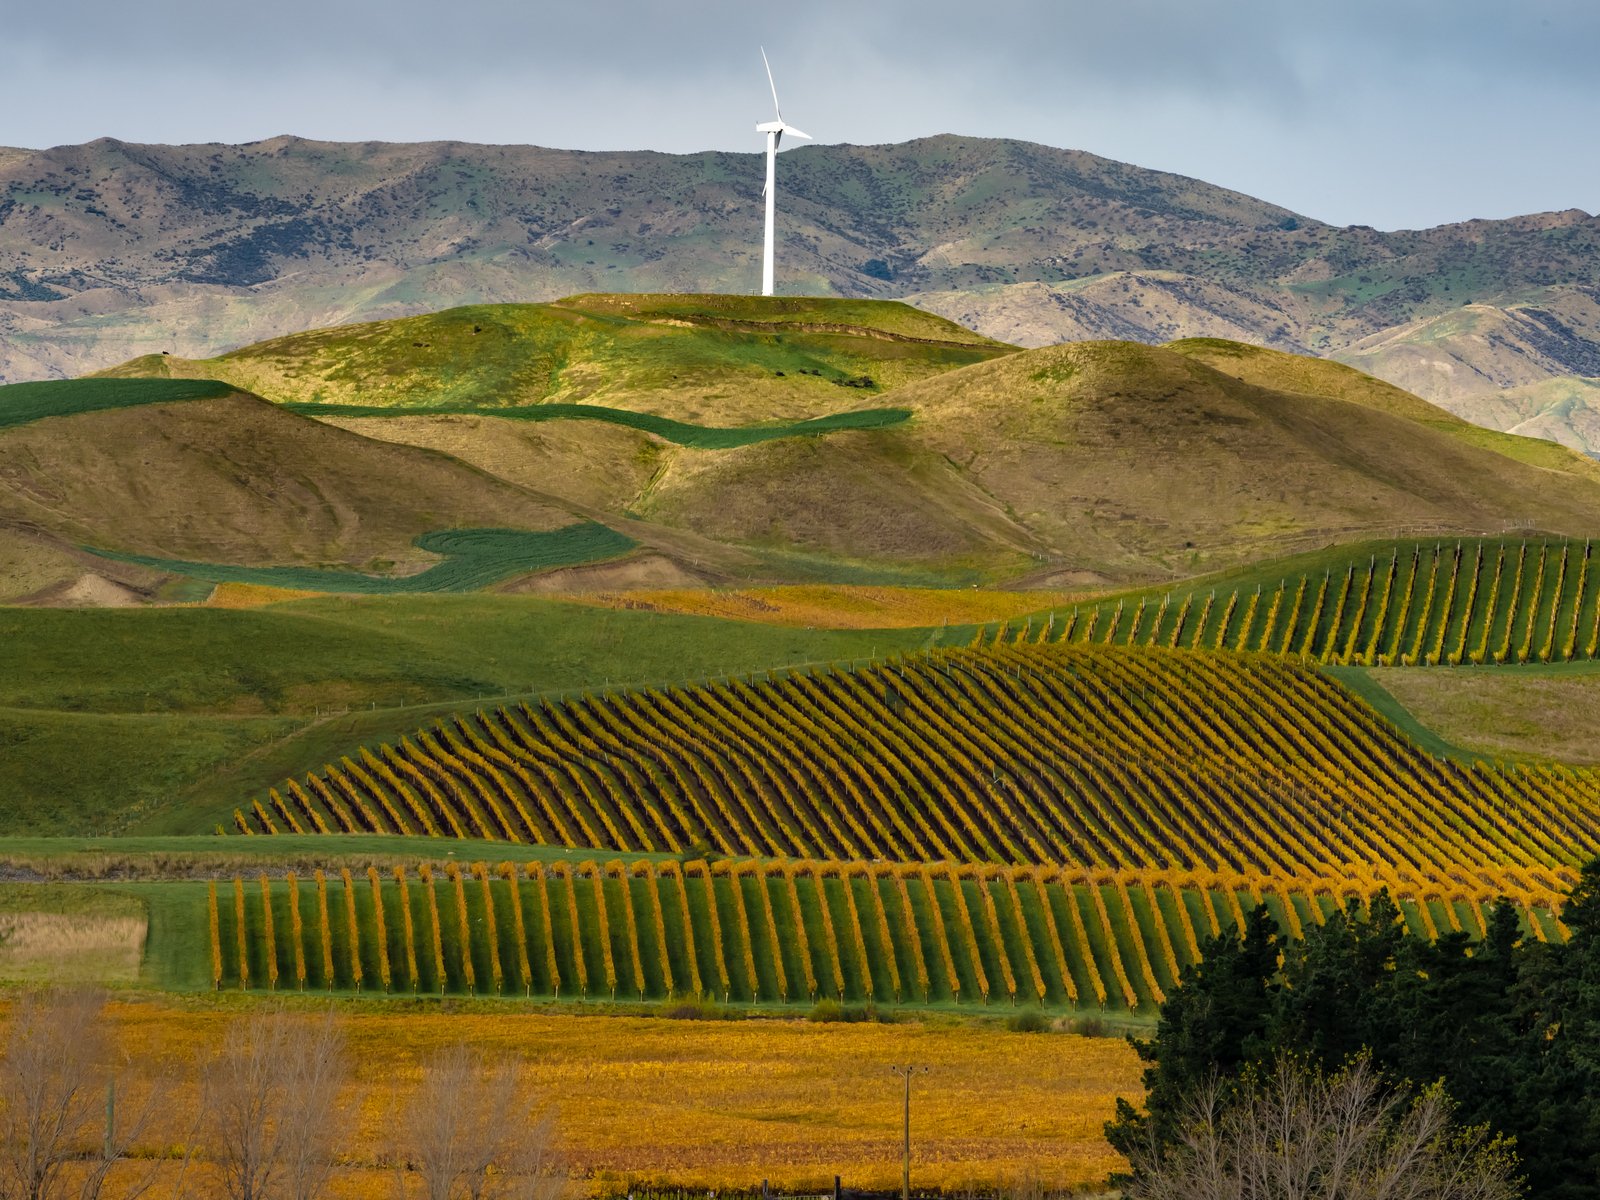 Vineyards near Blenheim in New Zealand. Local producer Cloudy Bay is one of the founding members of the Sustainable Wine Roundtable.